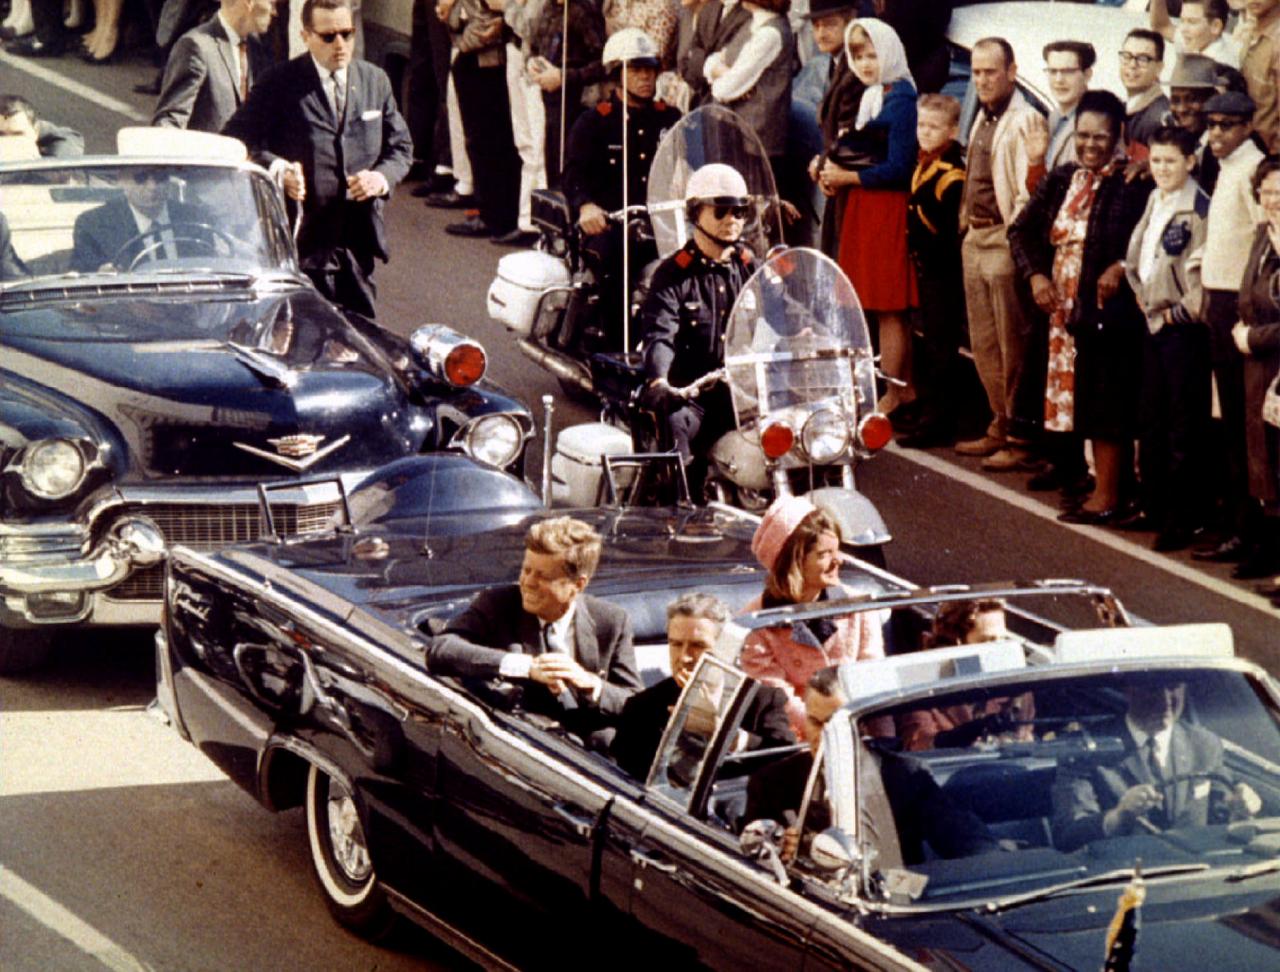 Trump says will release nearly all JFK assassination files